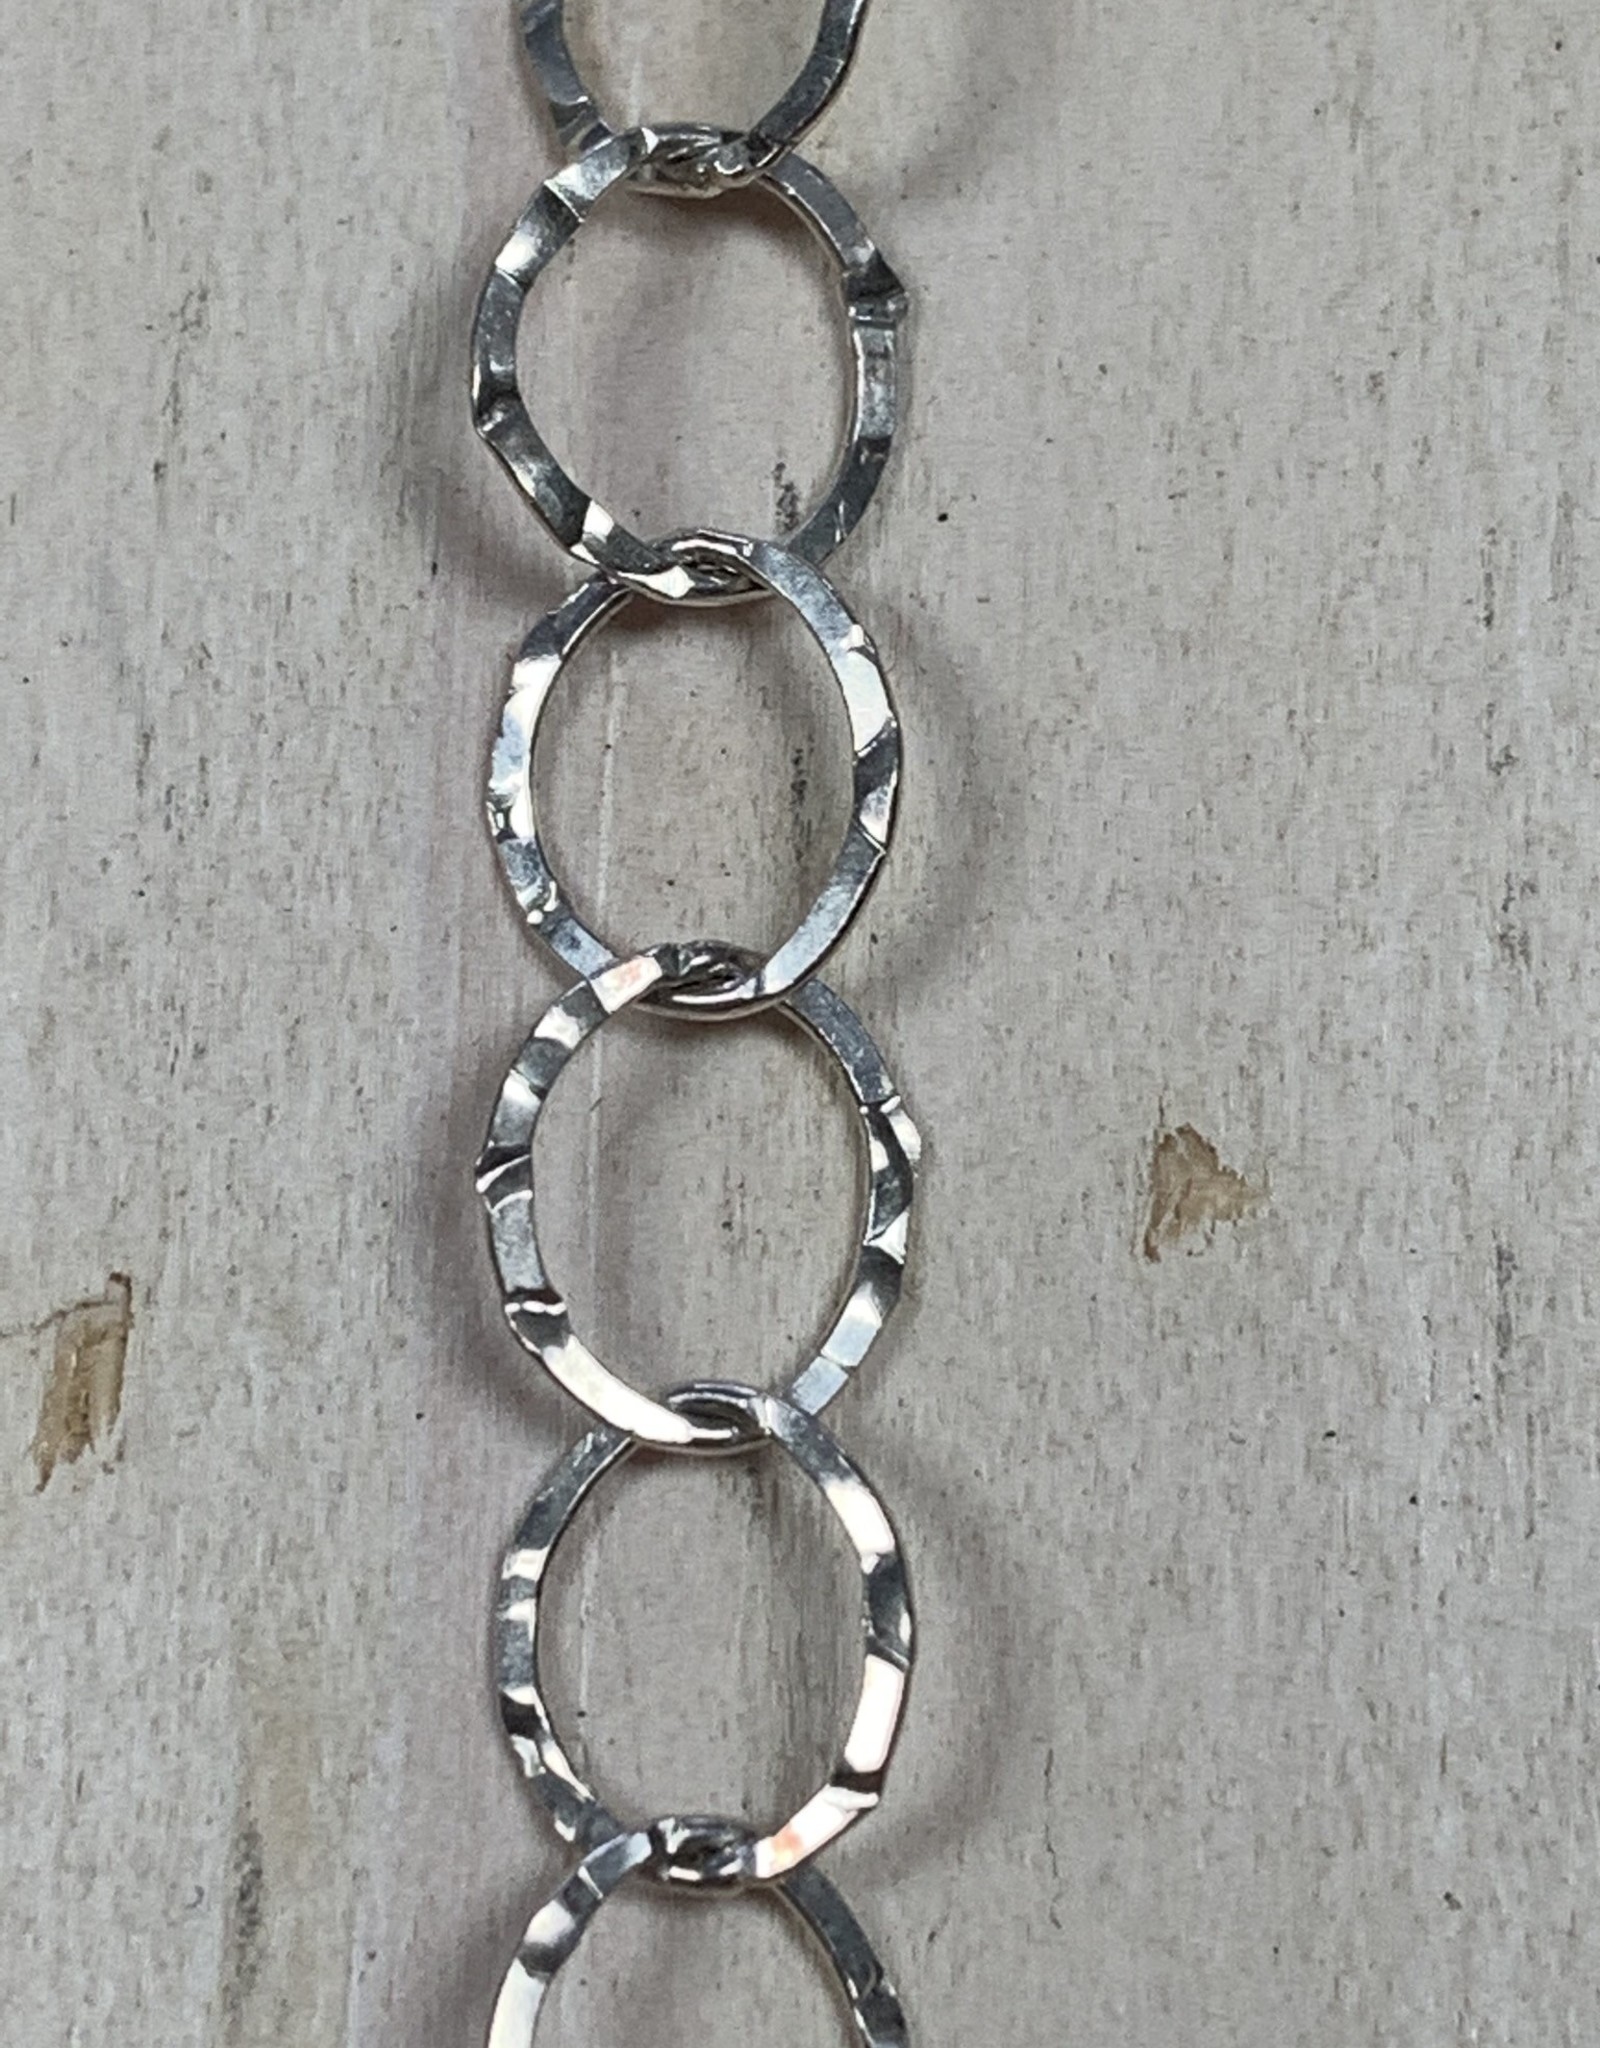 Large Round Hammered Chain Sterling Silver Inch